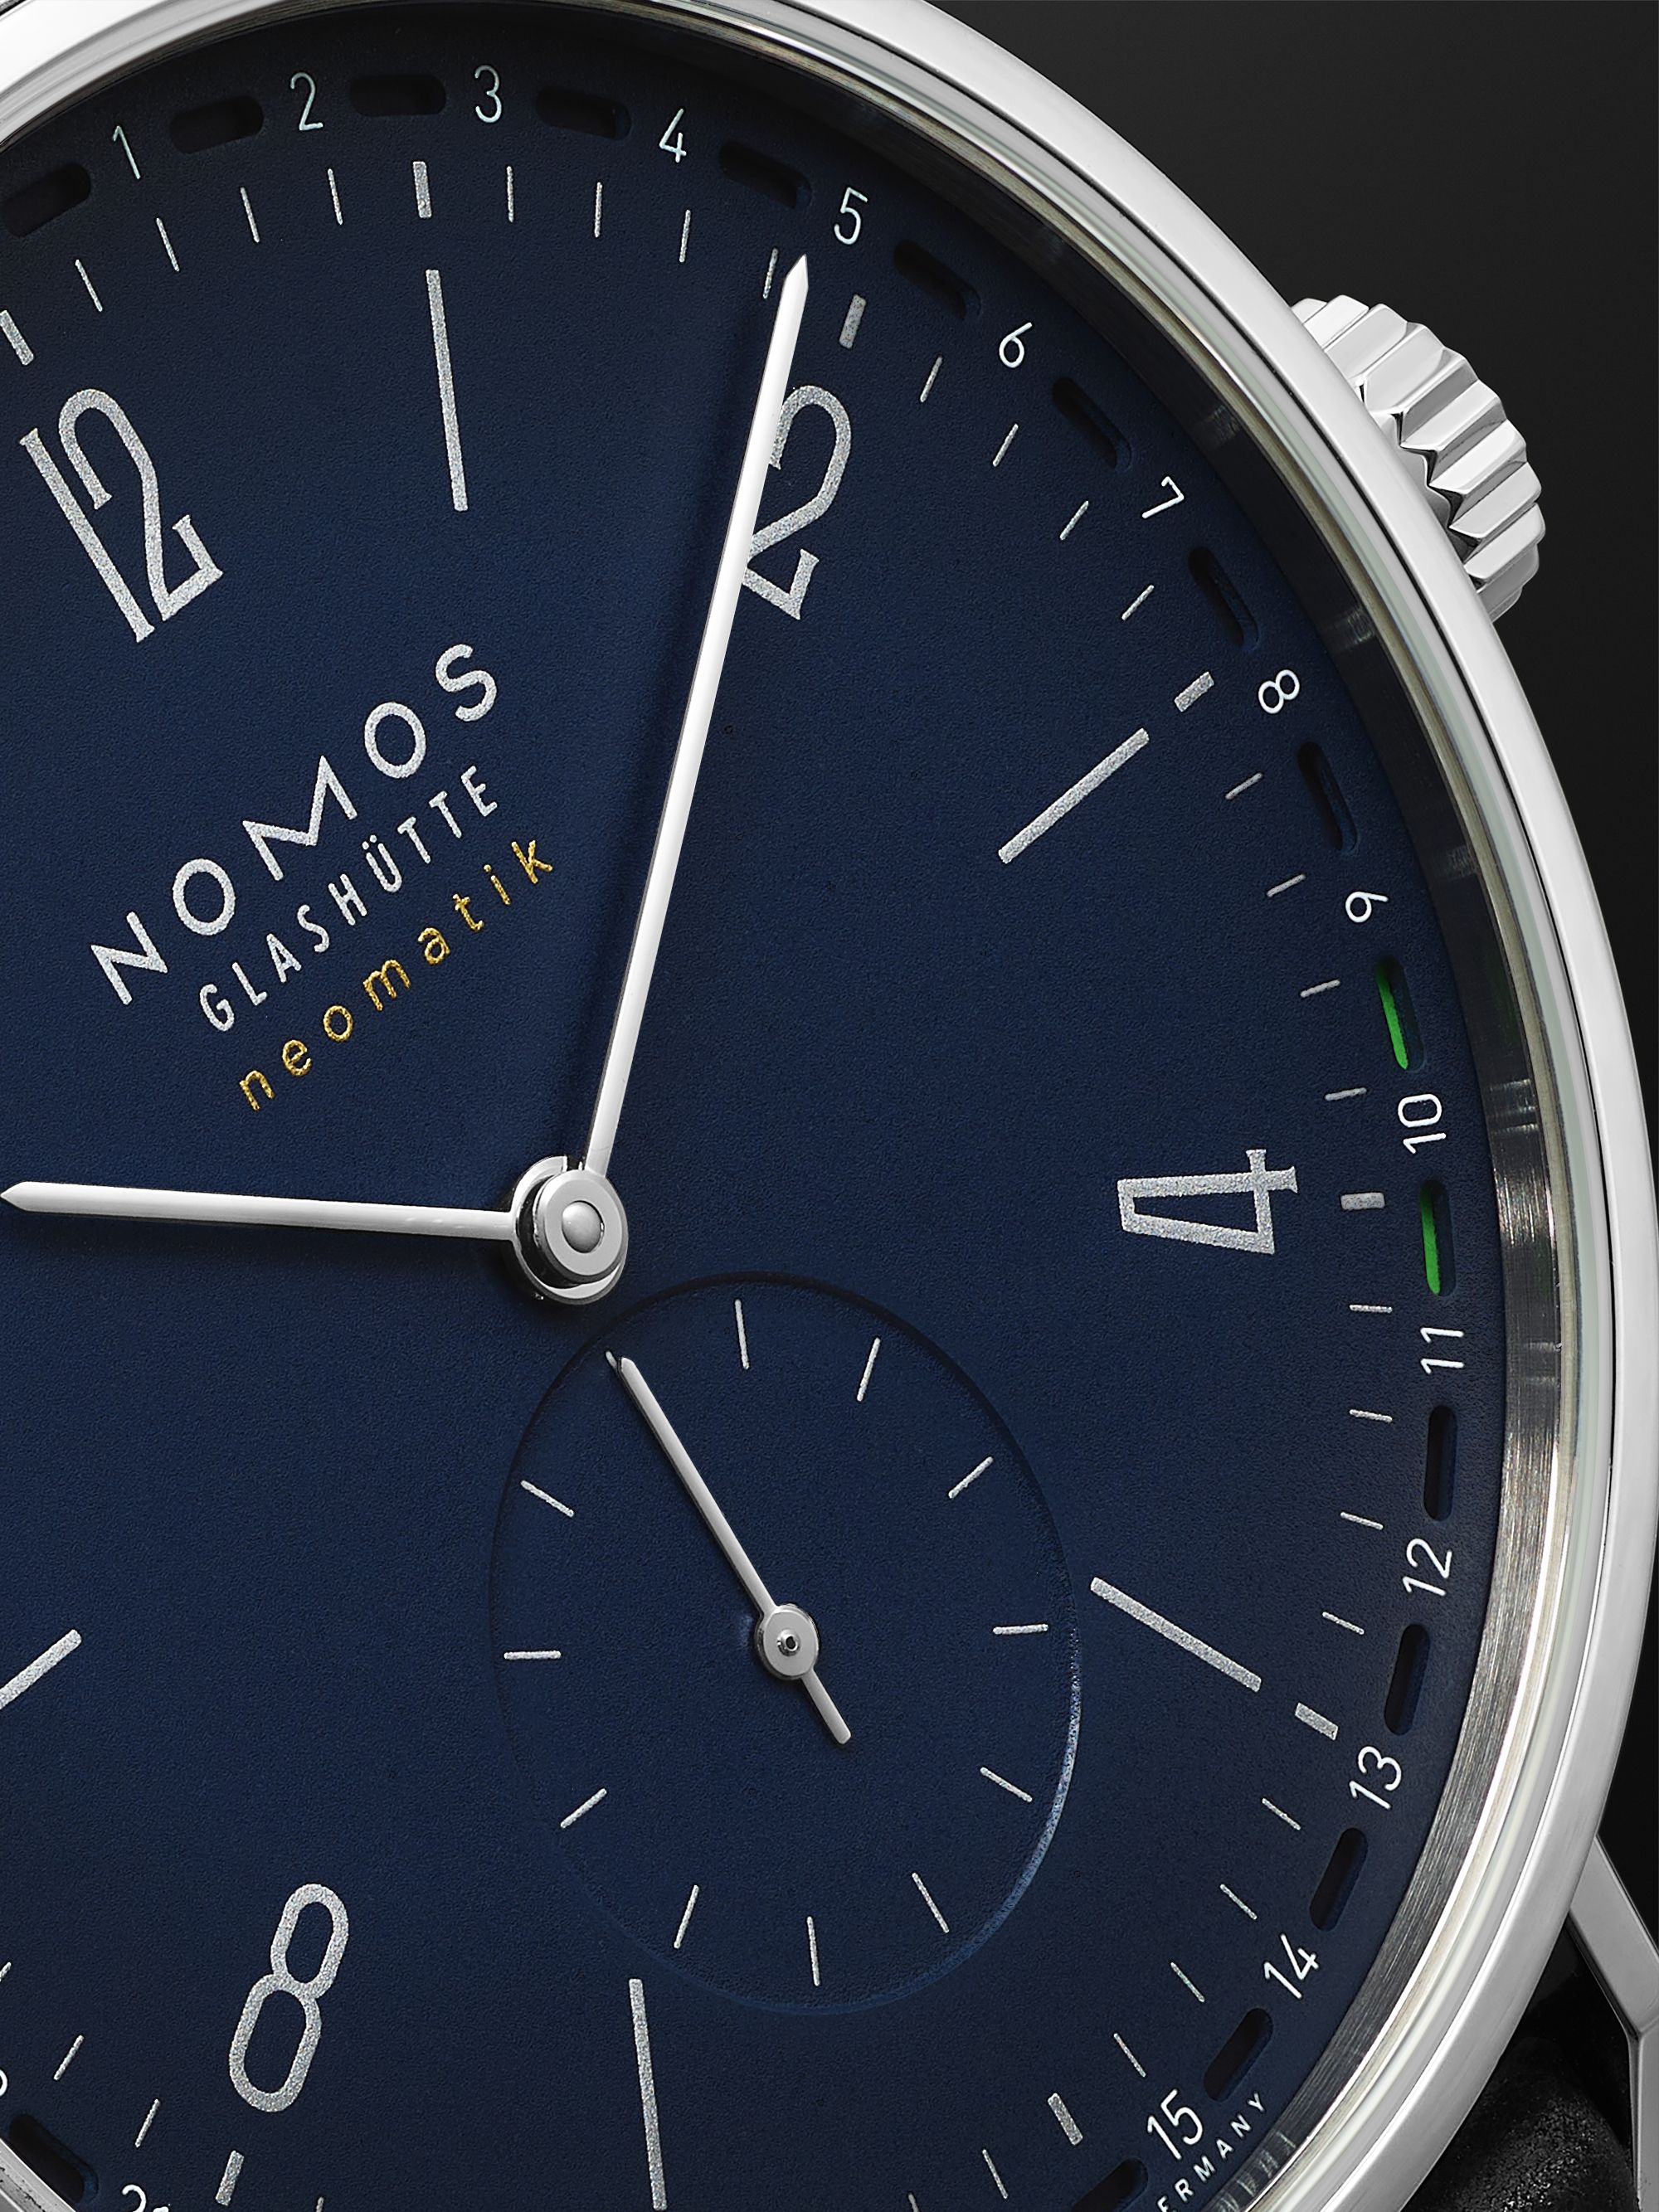 NOMOS GLASHÜTTE Tangente Neomatik 41 Automatic 41mm Stainless Steel and Cordovan Leather Watch, Ref. No. 182